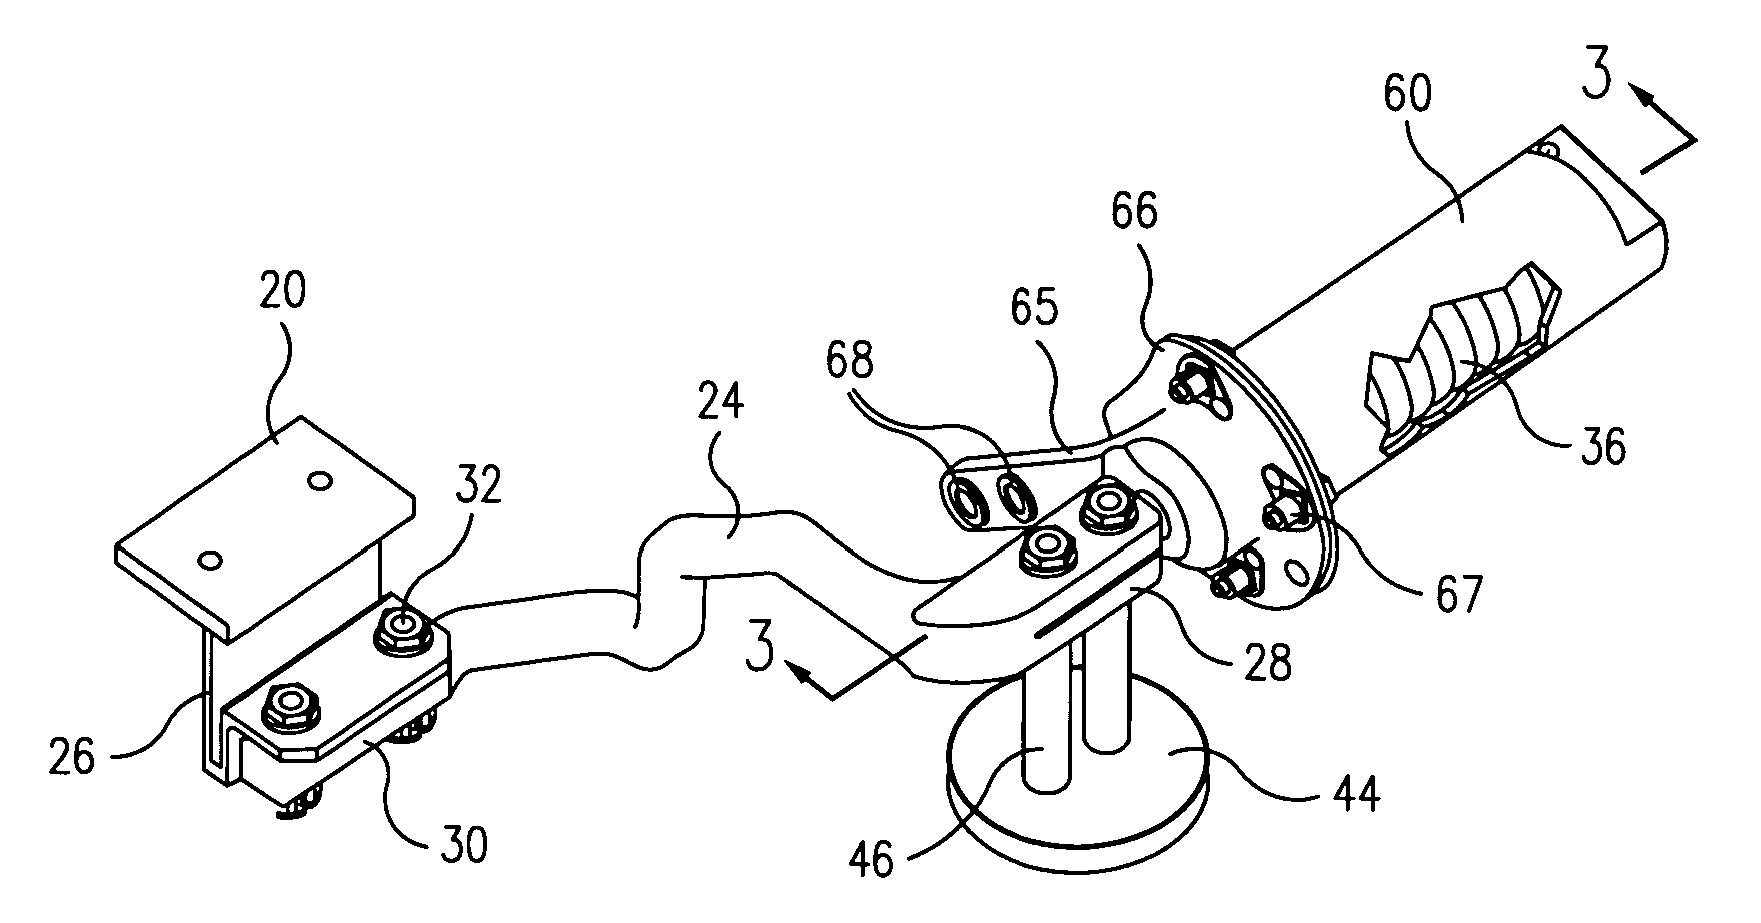 Droop stop mechanism for helicopter rotor blade